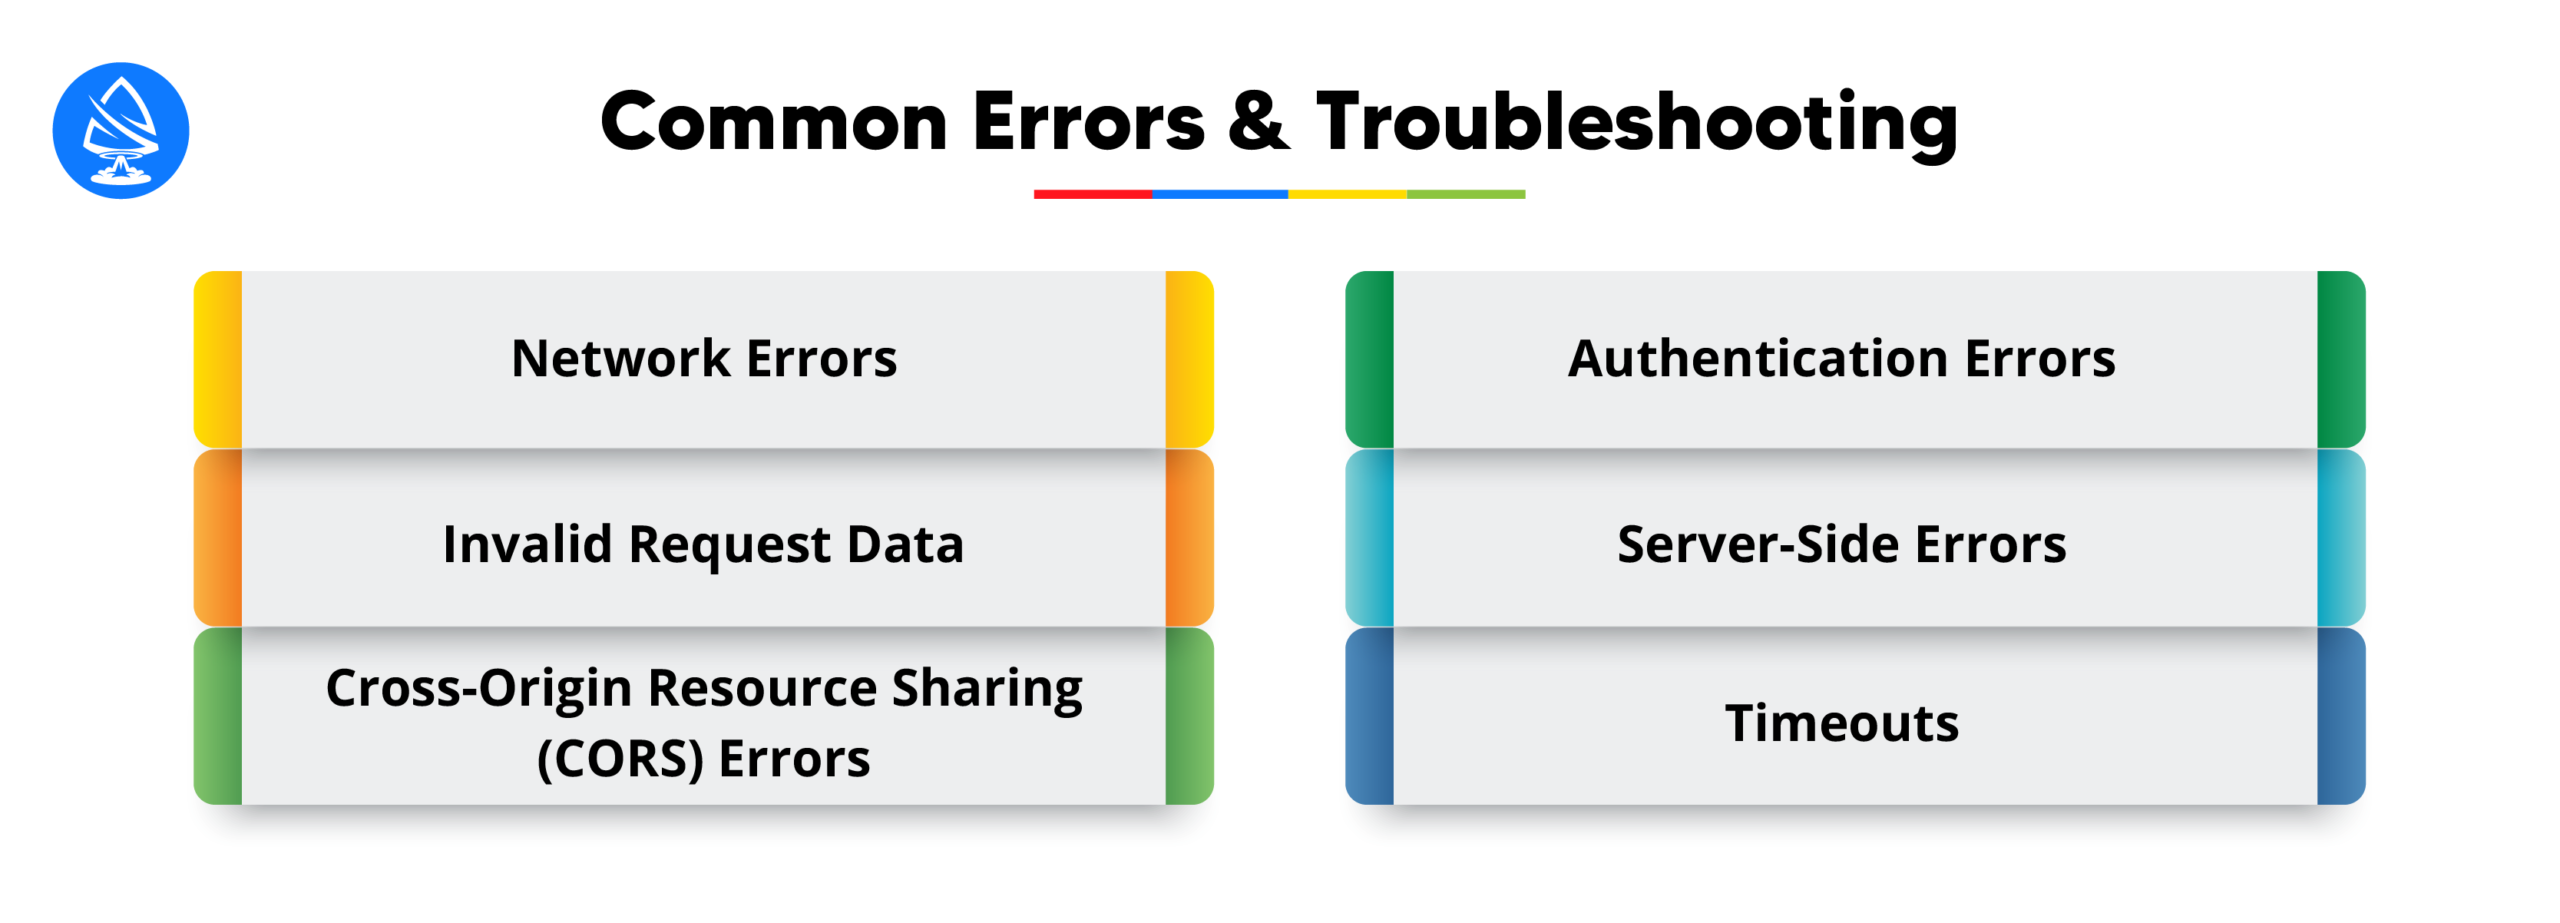 Common Errors and Troubleshooting Tips 